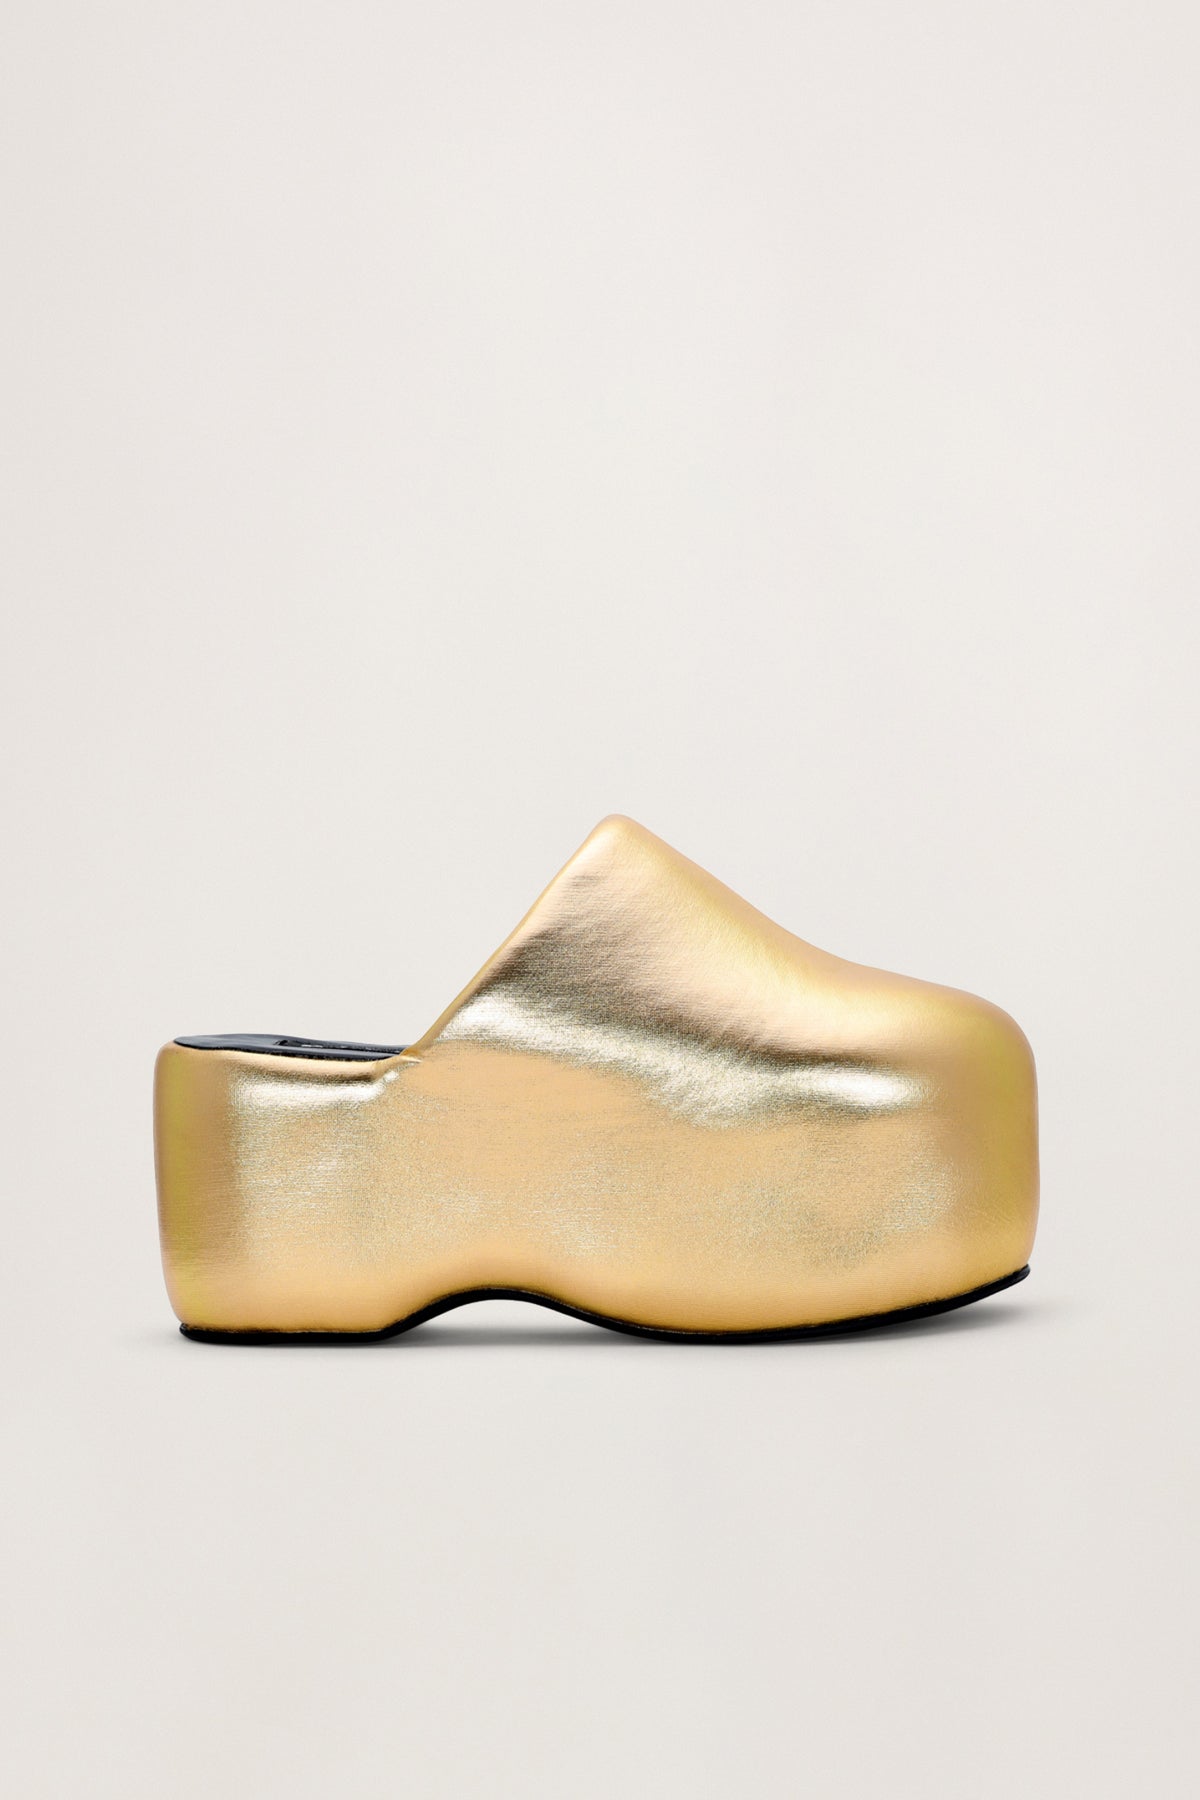 Platform Bubble Clog in Star Gold